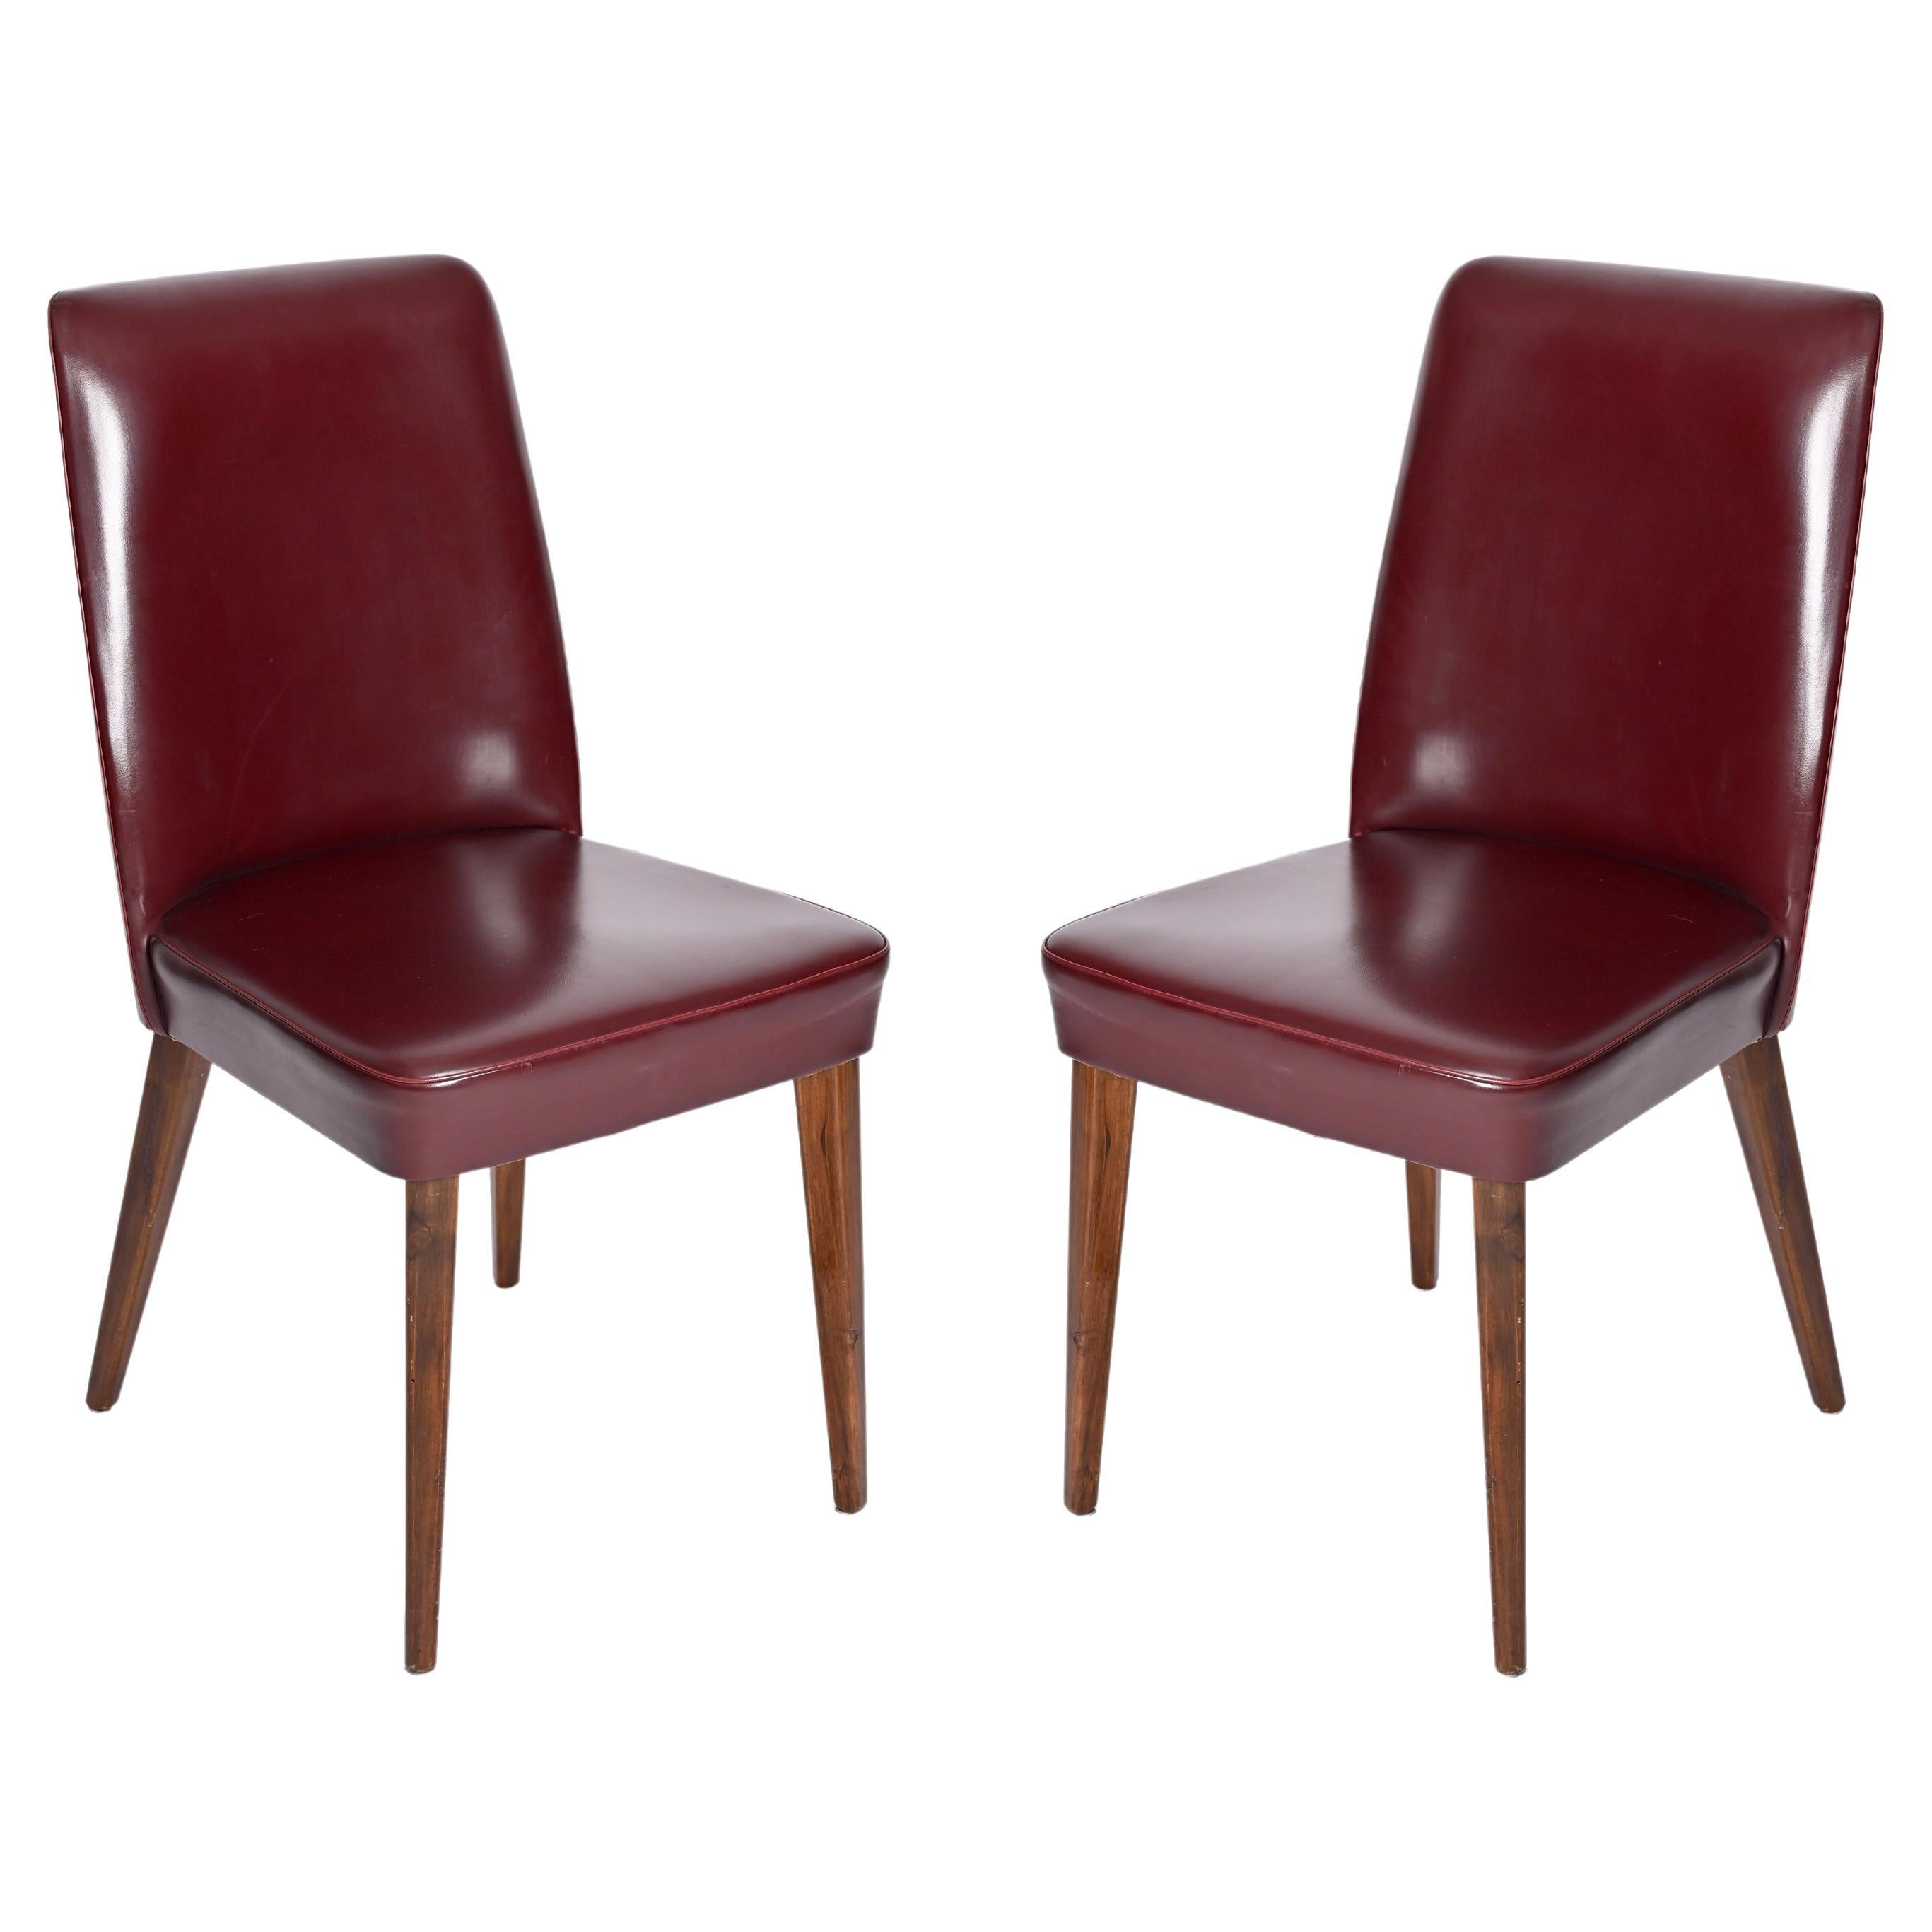 Pair of Bordeaux Leather Chairs by Anonima Castelli, Italy, 1950s